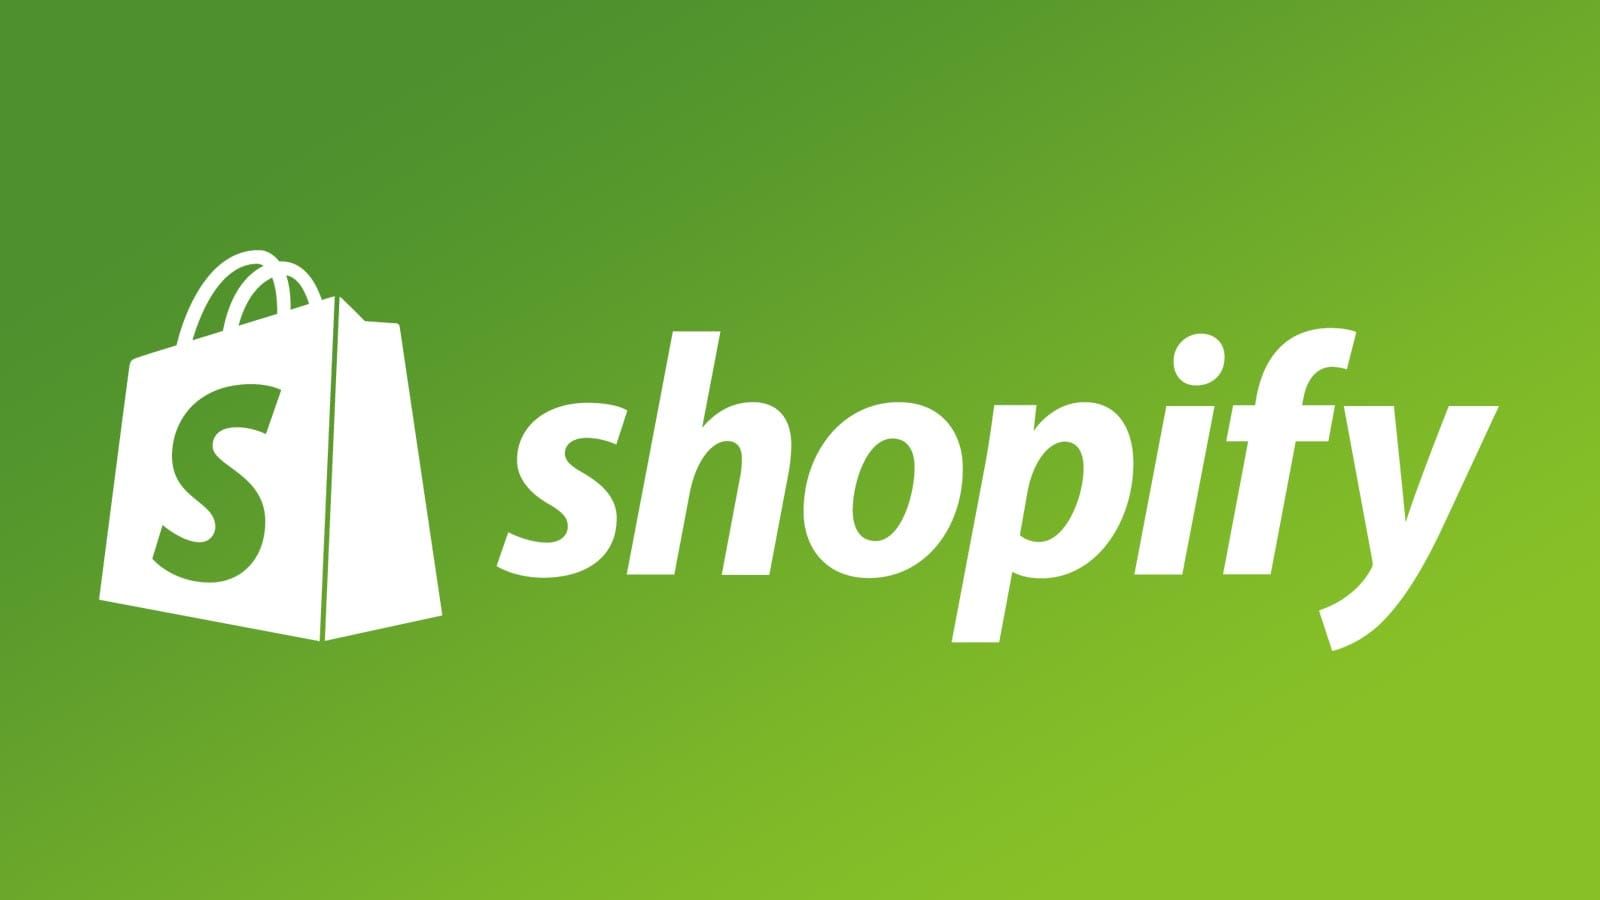 Shopify unveils new tools, Twitter tie-up to beat e-commerce slowdown